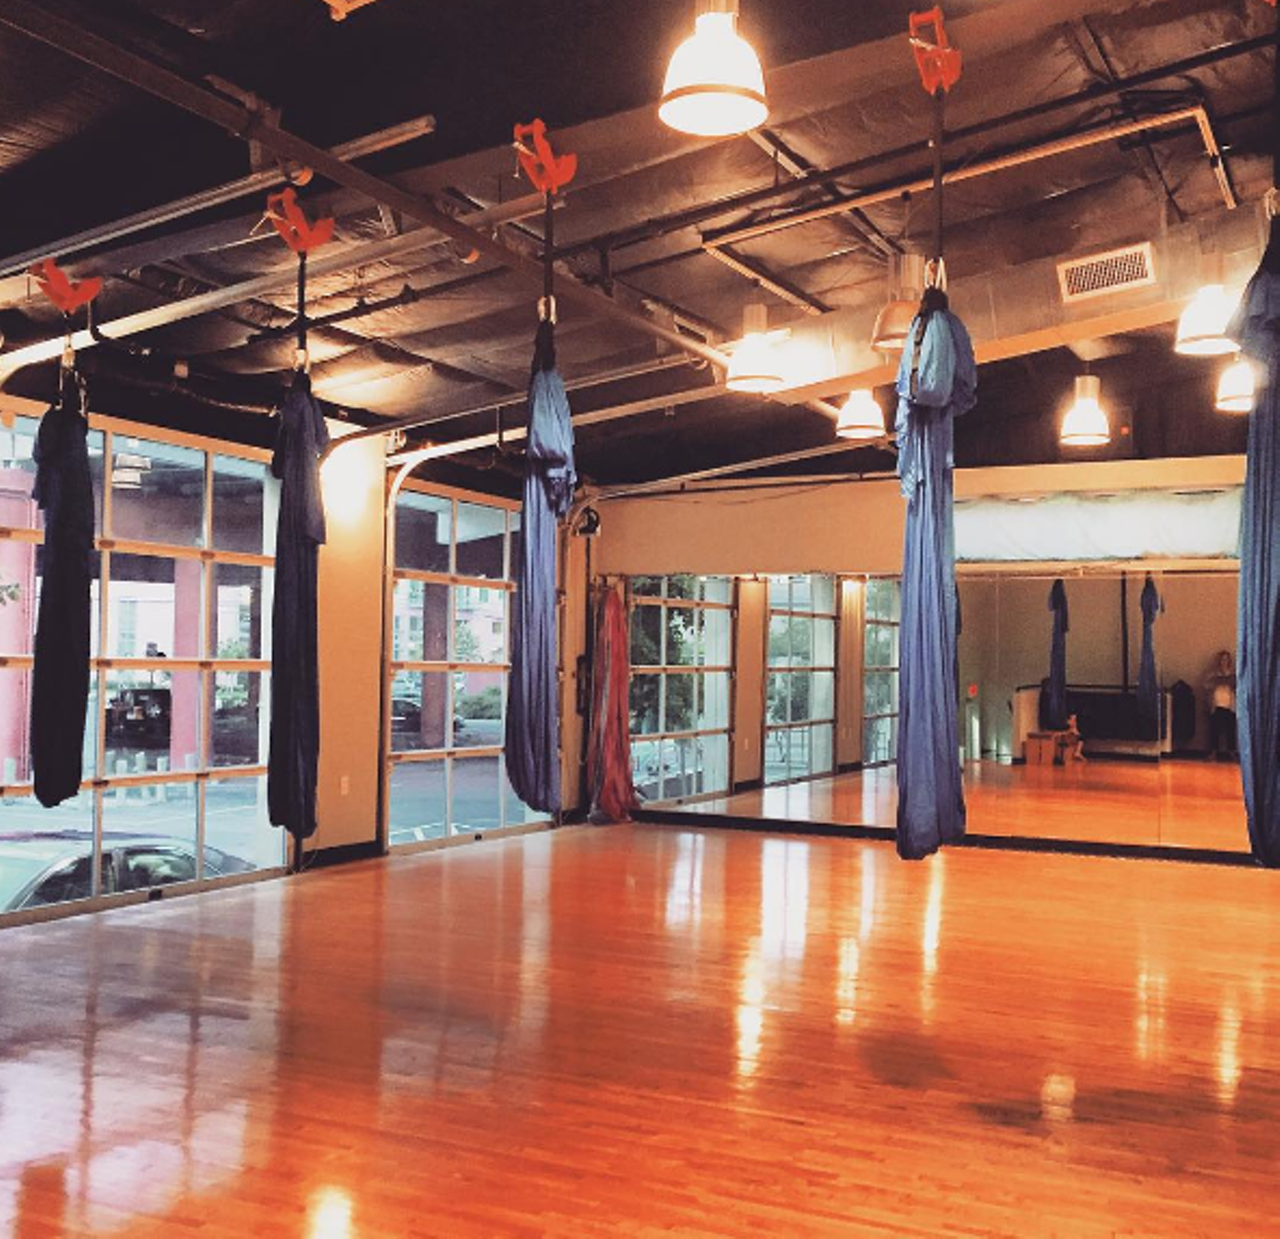 The Synergy Studio
300 E Grayson St #100, (210) 824-4225
"Movement for everyBody" is Synergy Studio's motto, where they offer several yoga classes, as well as Tai Chi, pilates, workshops and teacher training.
Photo via Instagram/laurenjungquist